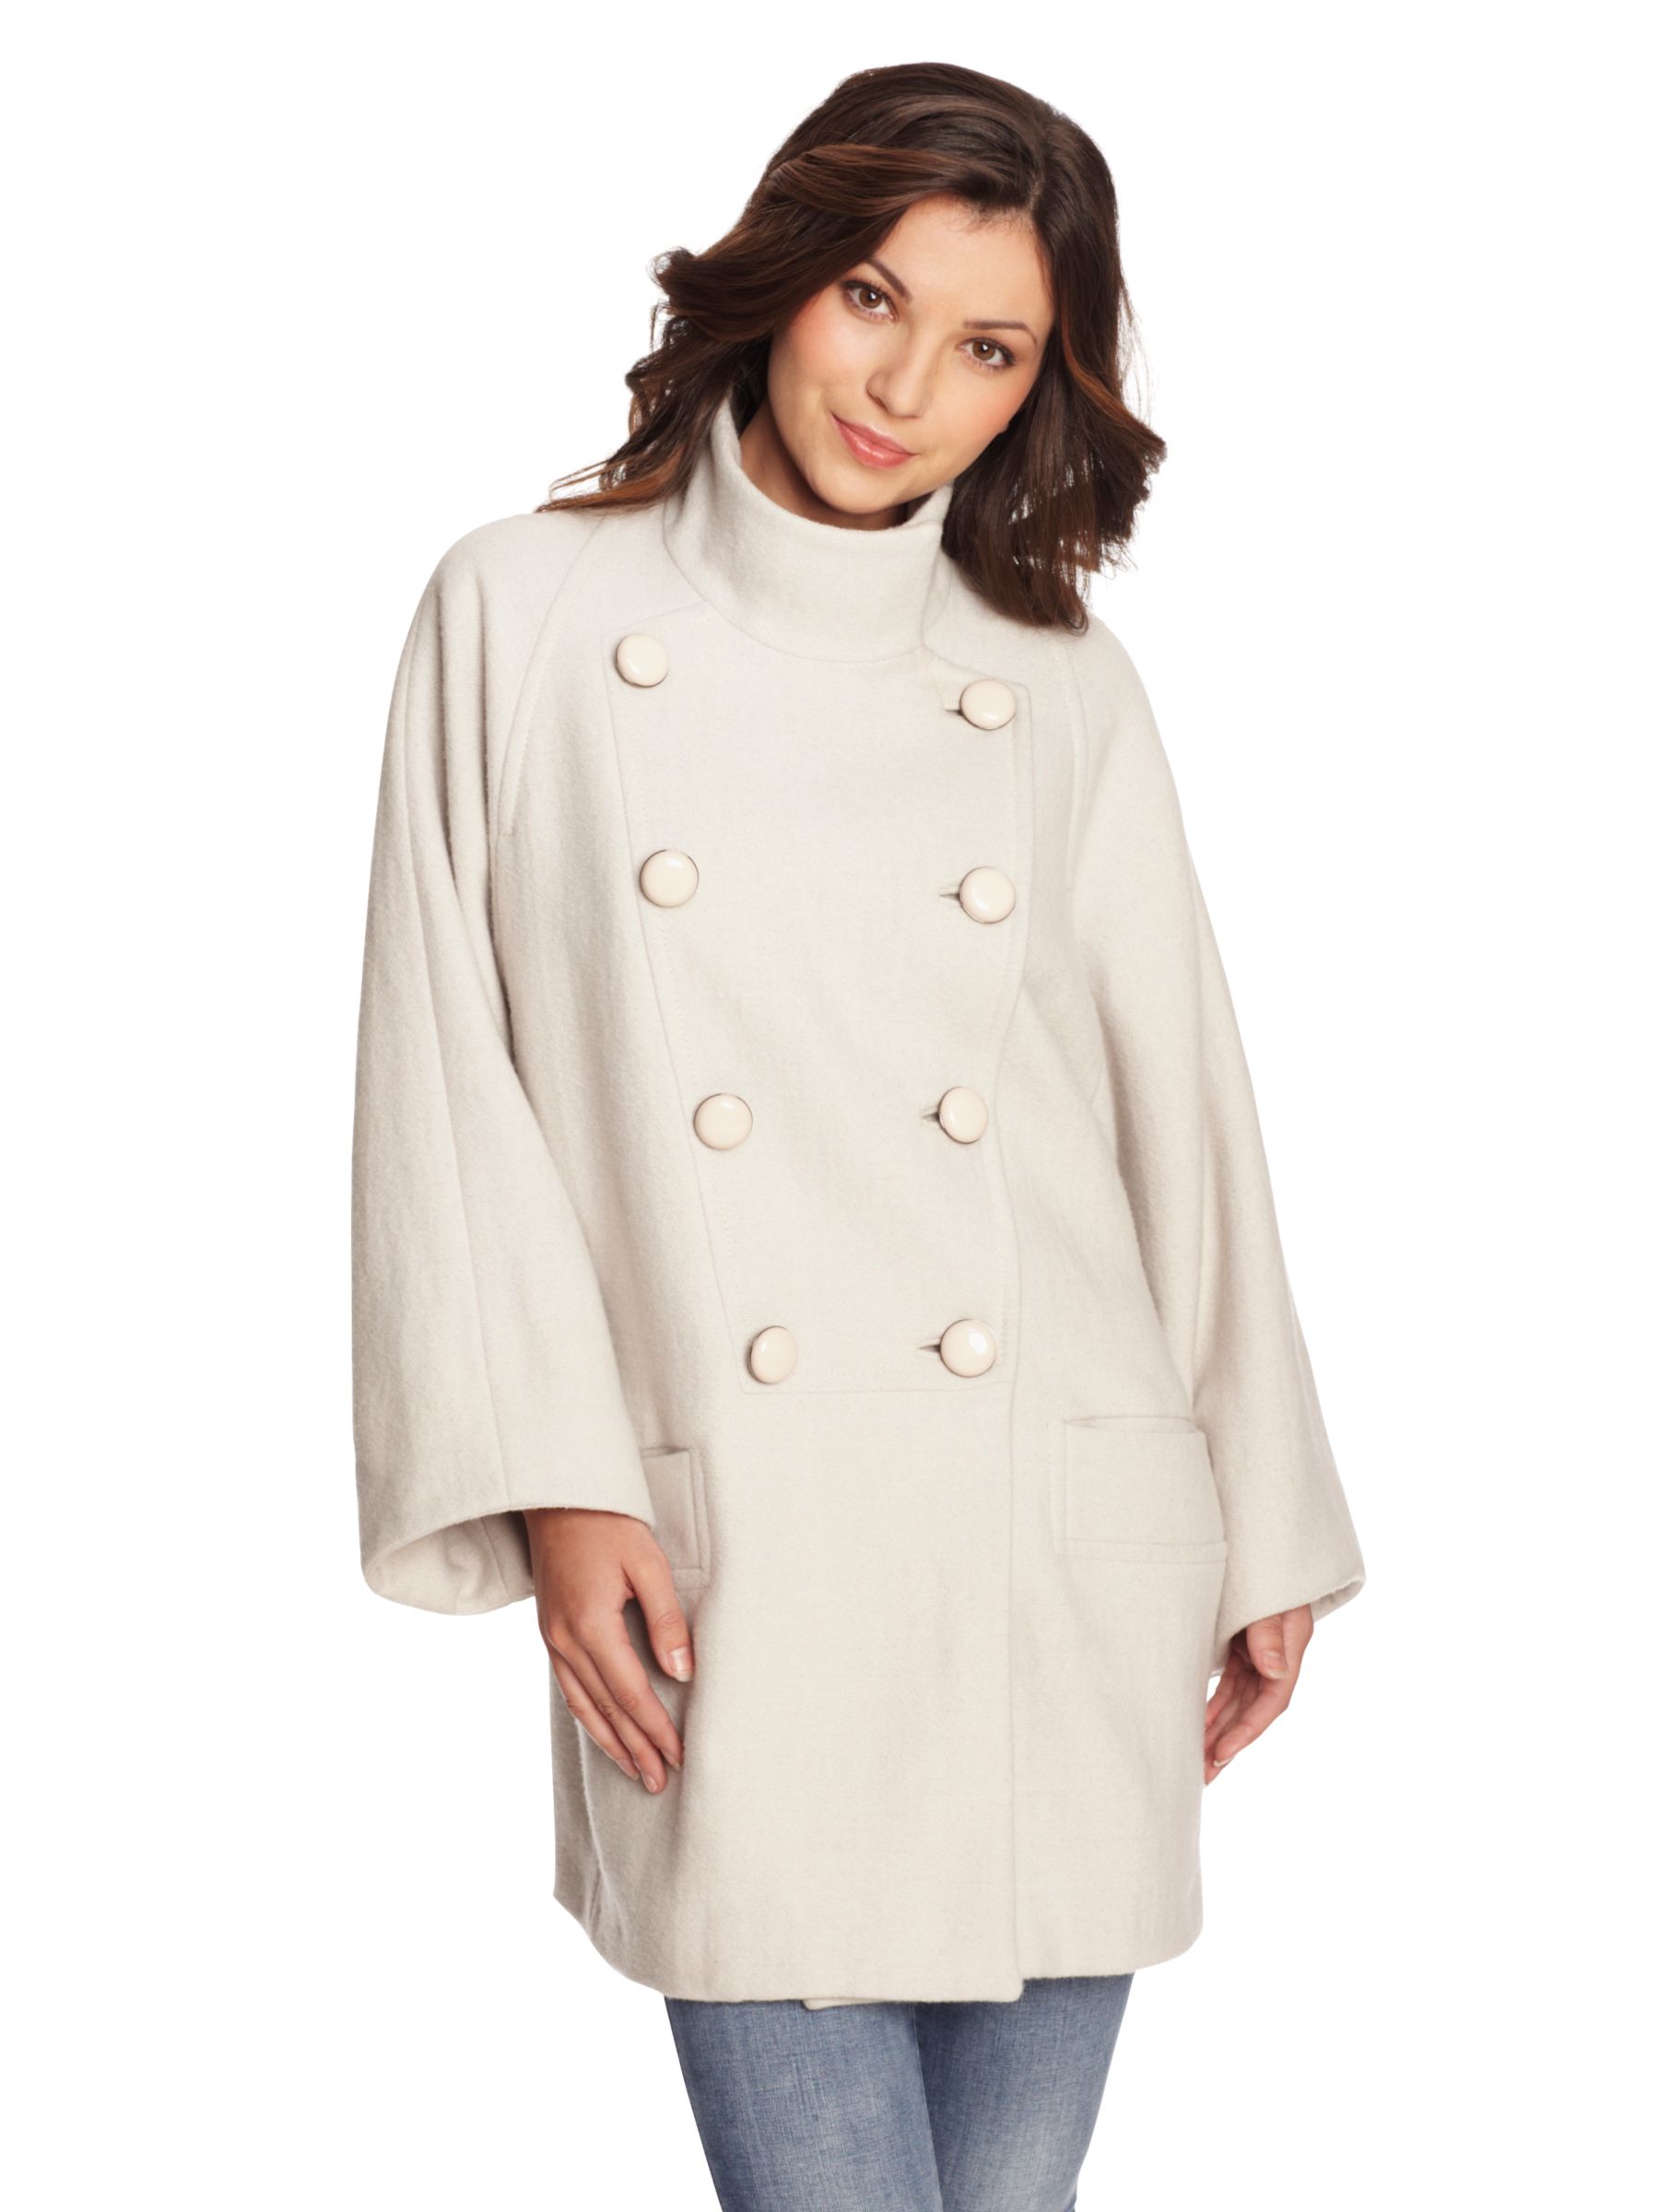 French Connection Blizzard Batwing Double Breasted Coat, Cream at John Lewis